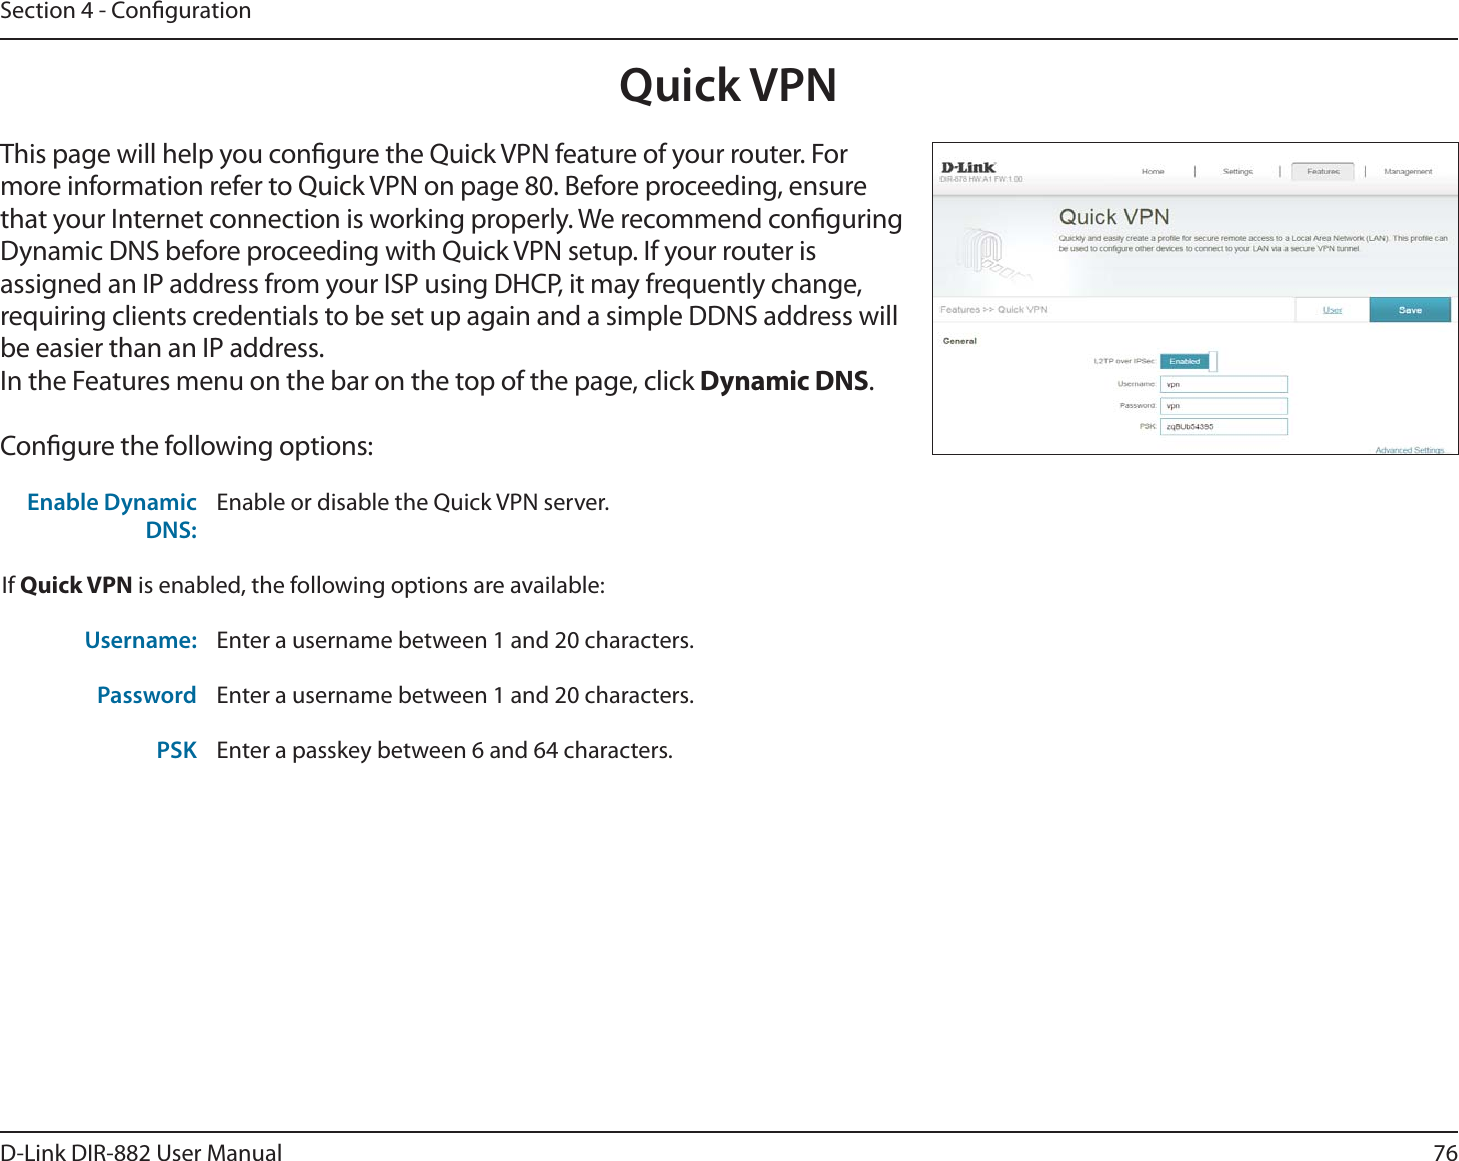 76D-Link DIR-882 User ManualSection 4 - CongurationQuick VPNThis page will help you congure the Quick VPN feature of your router. For more information refer to Quick VPN on page 80. Before proceeding, ensure that your Internet connection is working properly. We recommend conguring Dynamic DNS before proceeding with Quick VPN setup. If your router is assigned an IP address from your ISP using DHCP, it may frequently change, requiring clients credentials to be set up again and a simple DDNS address will be easier than an IP address.In the Features menu on the bar on the top of the page, click Dynamic DNS.Congure the following options:Enable Dynamic DNS:Enable or disable the Quick VPN server.If Quick VPN is enabled, the following options are available:Username: Enter a username between 1 and 20 characters.Password Enter a username between 1 and 20 characters.PSK Enter a passkey between 6 and 64 characters.